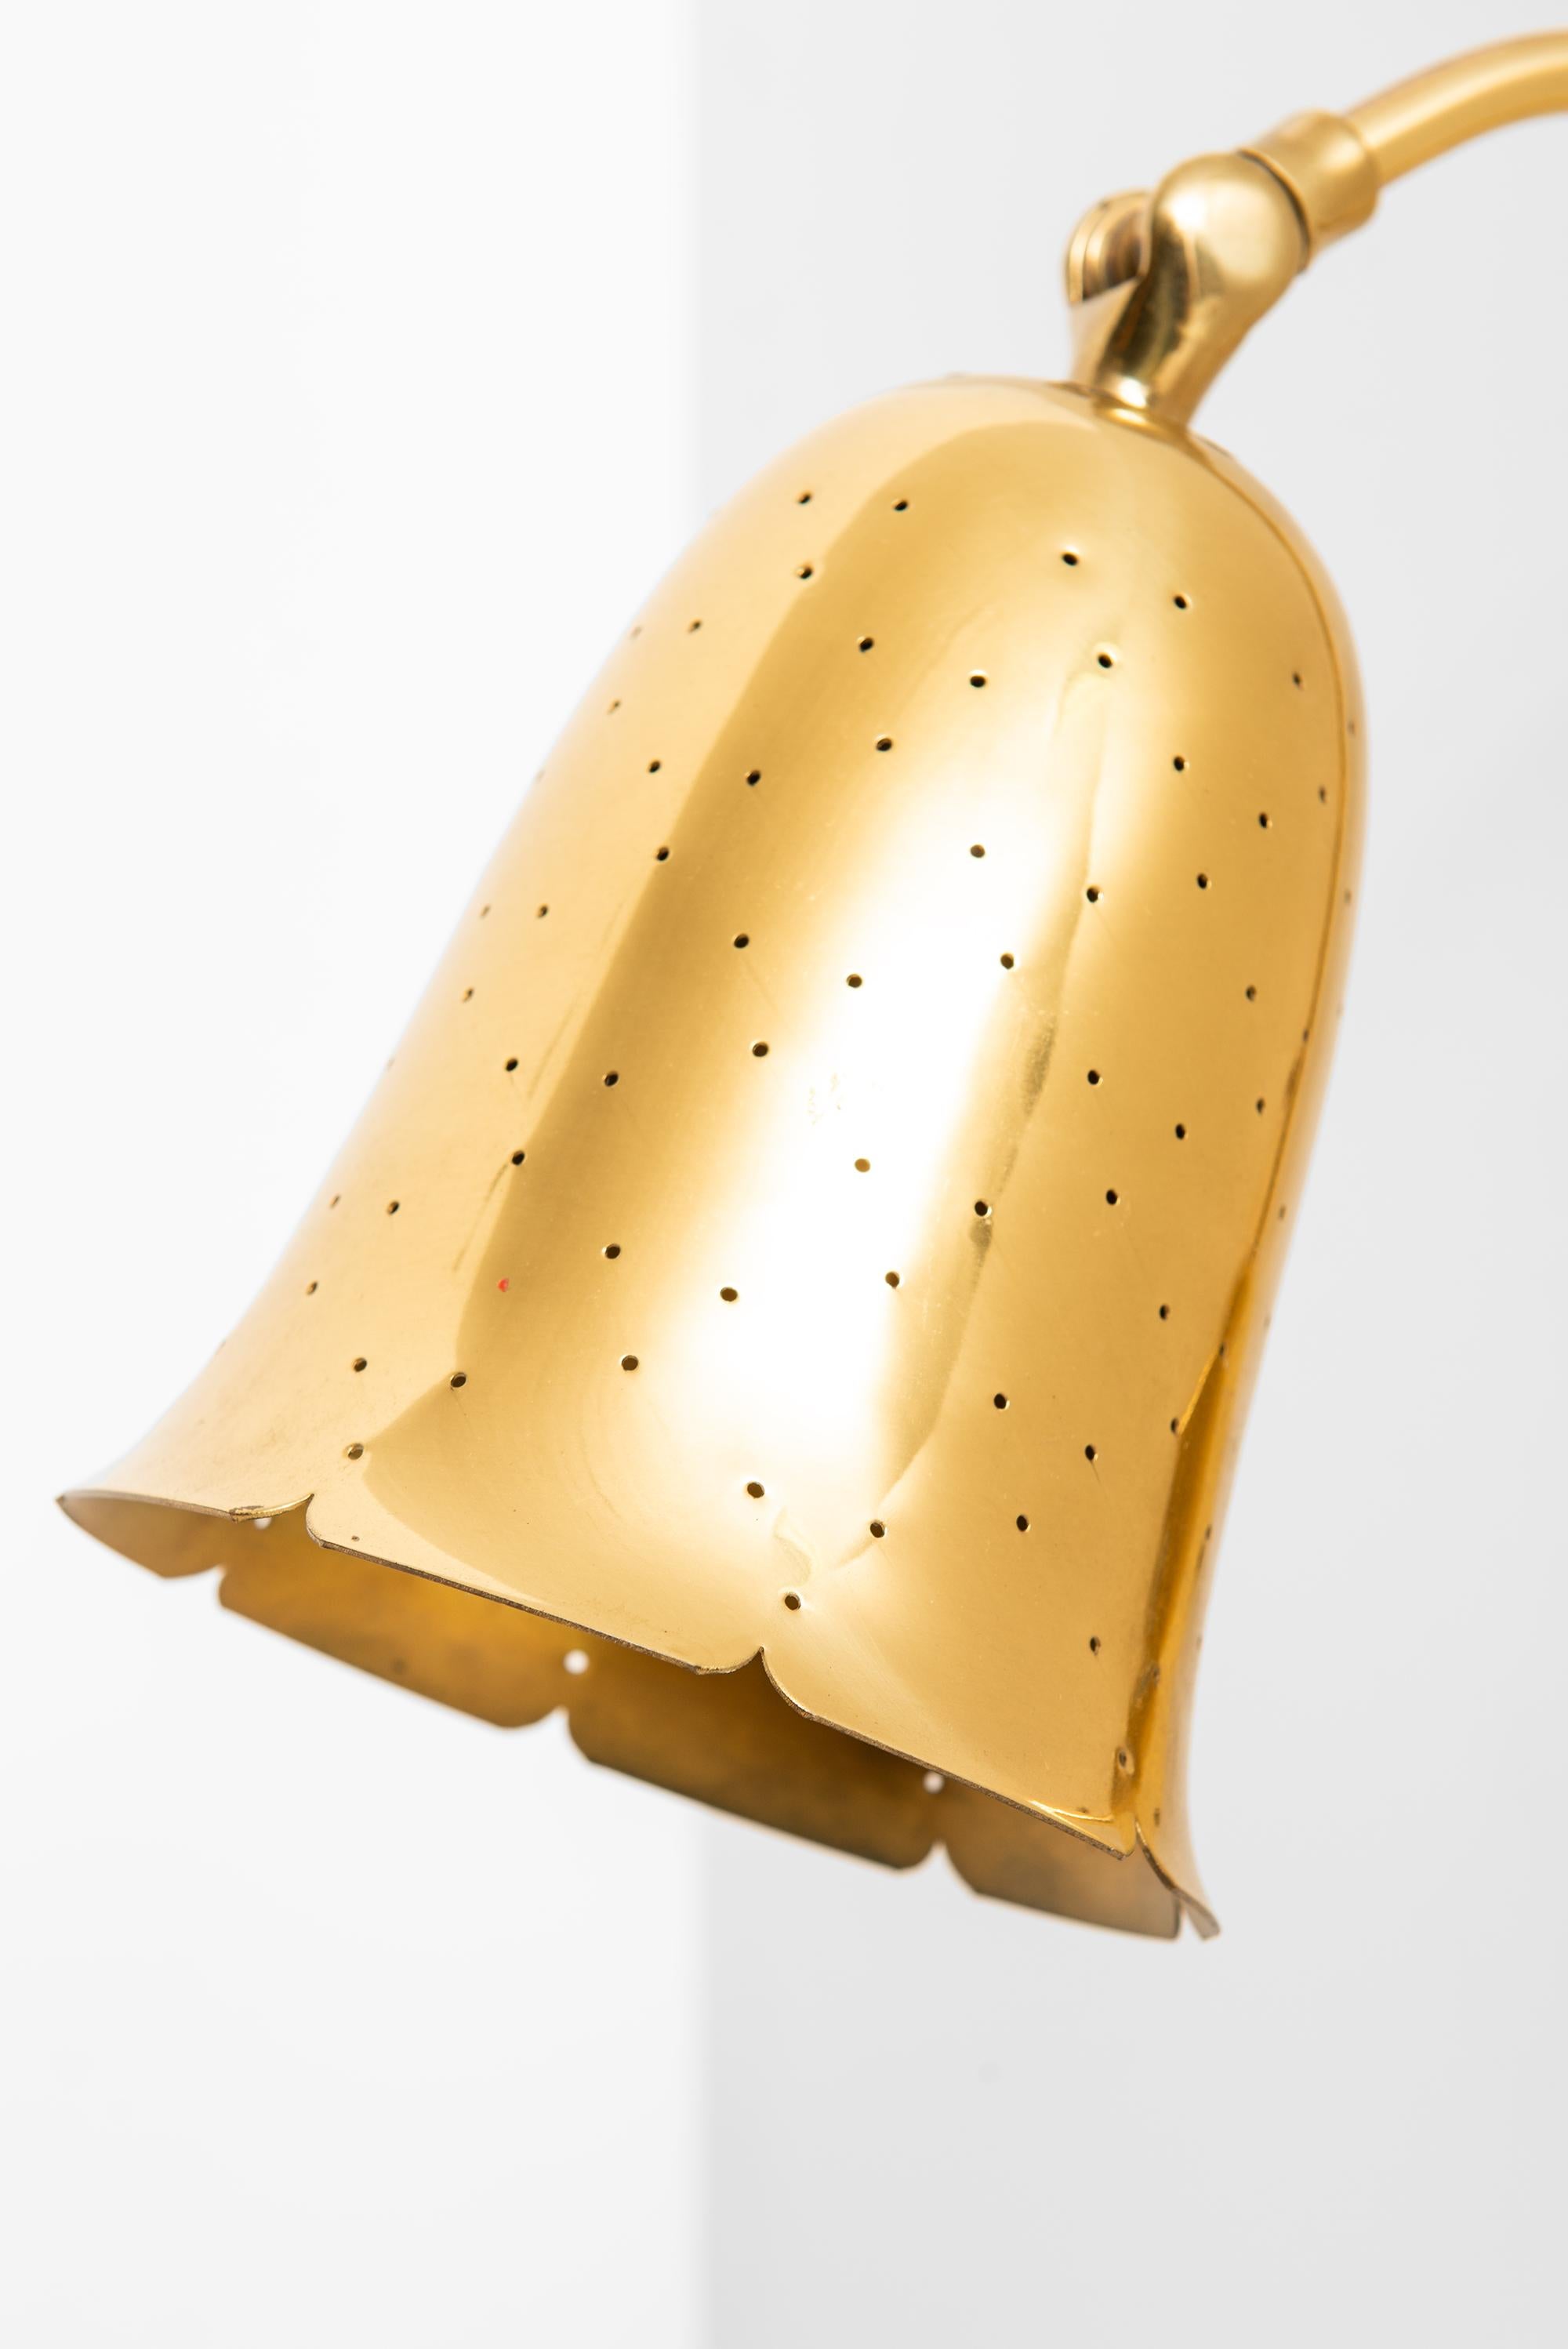 Scandinavian Modern Pair of Wall Lamps in Brass Produced by Boréns in Sweden